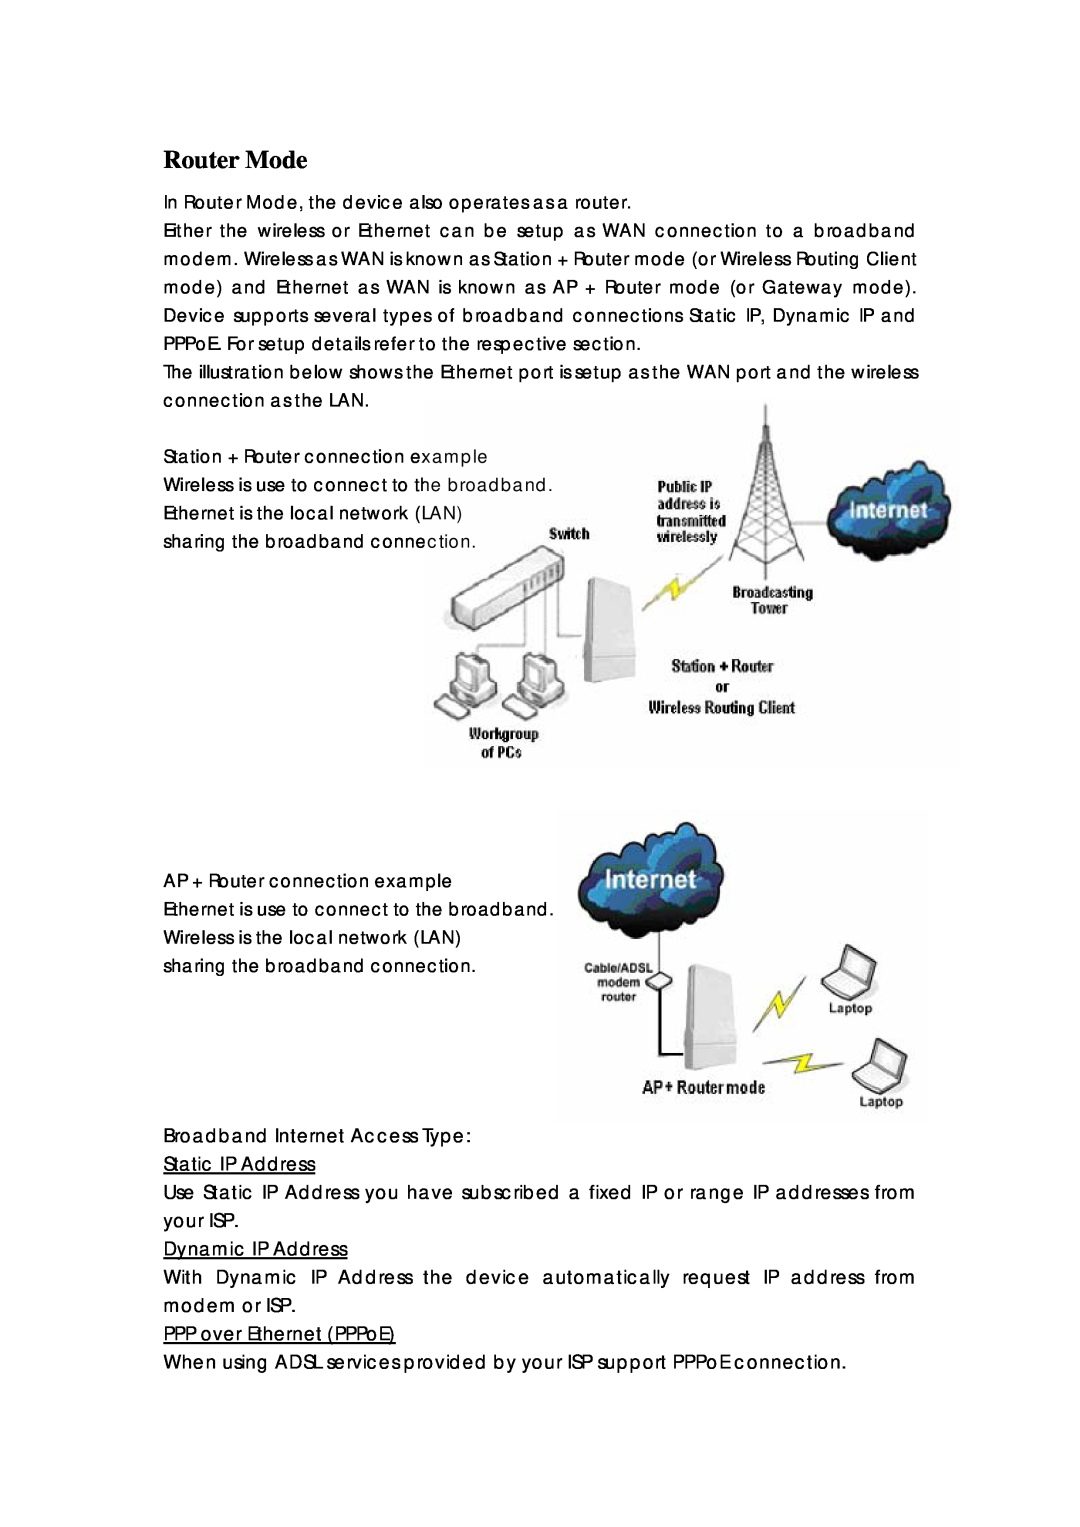 Compex Systems 802.11N manual Router Mode, Static IP Address, Dynamic IP Address, PPP over Ethernet PPPoE 